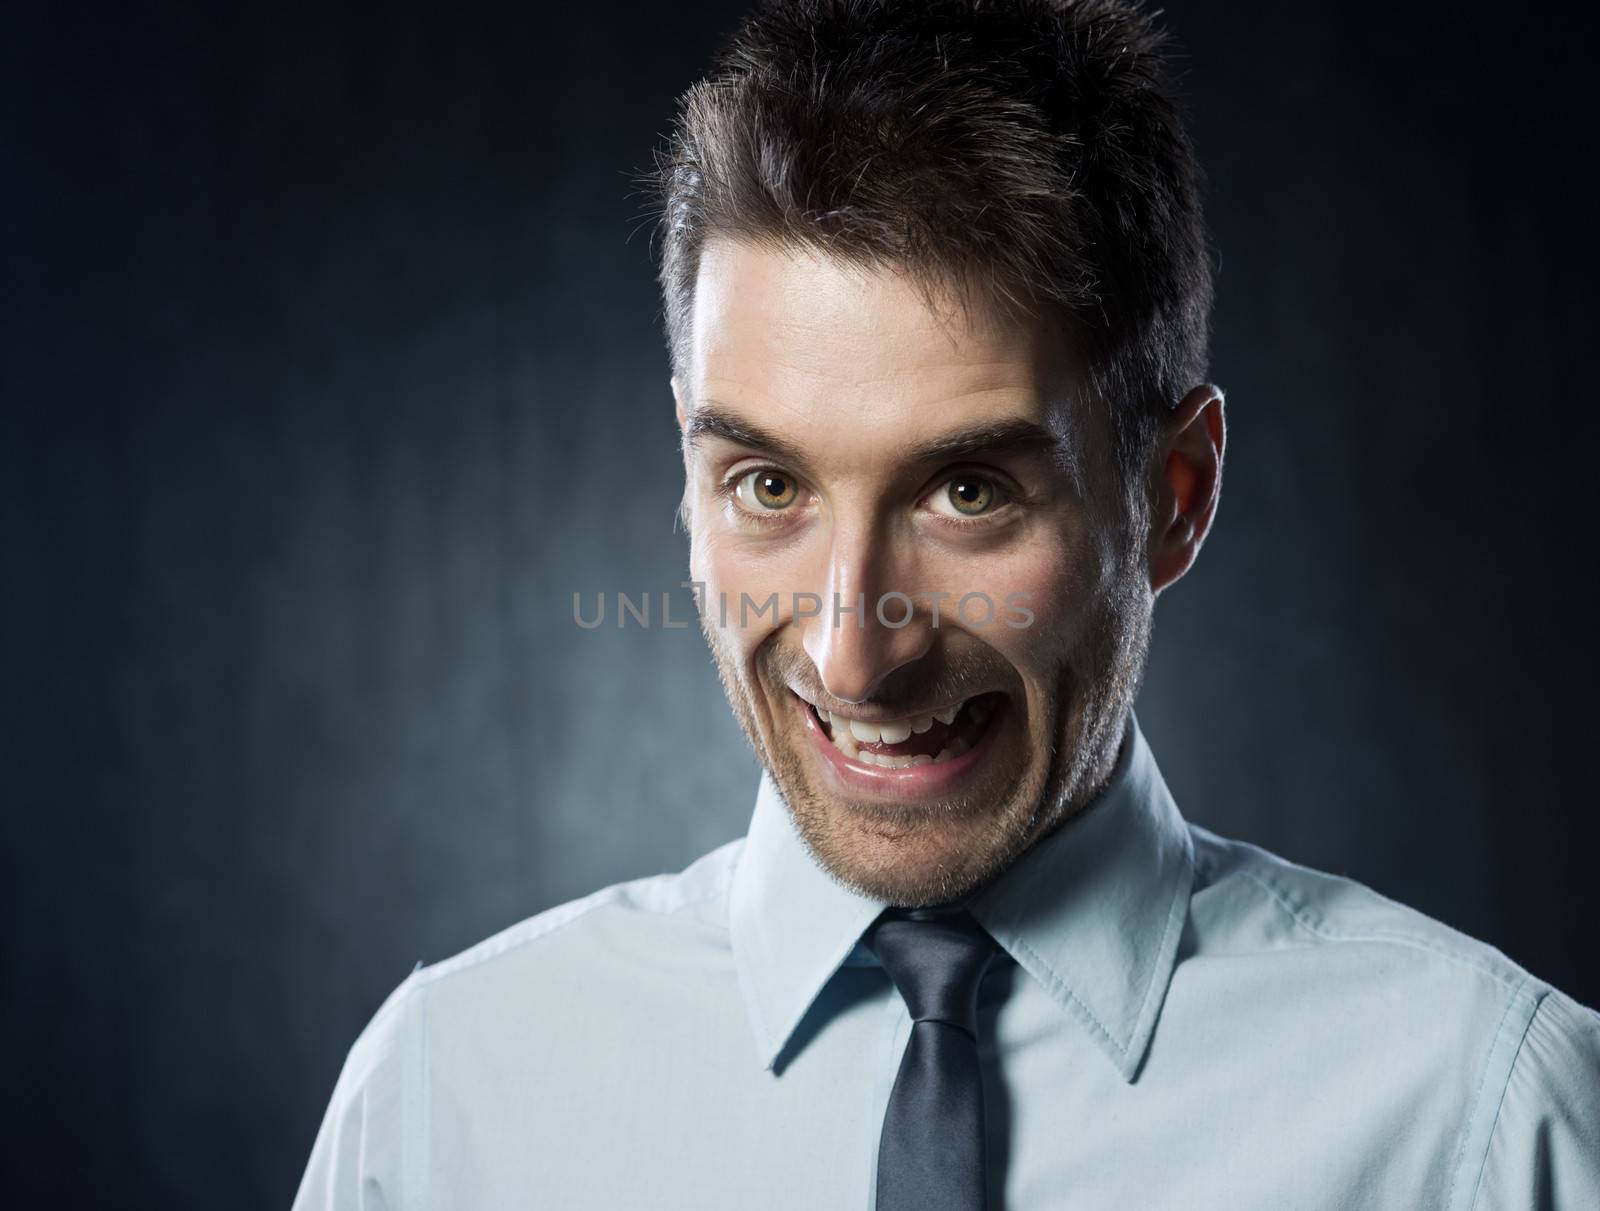 Young happy business man with funny expression on dark background.